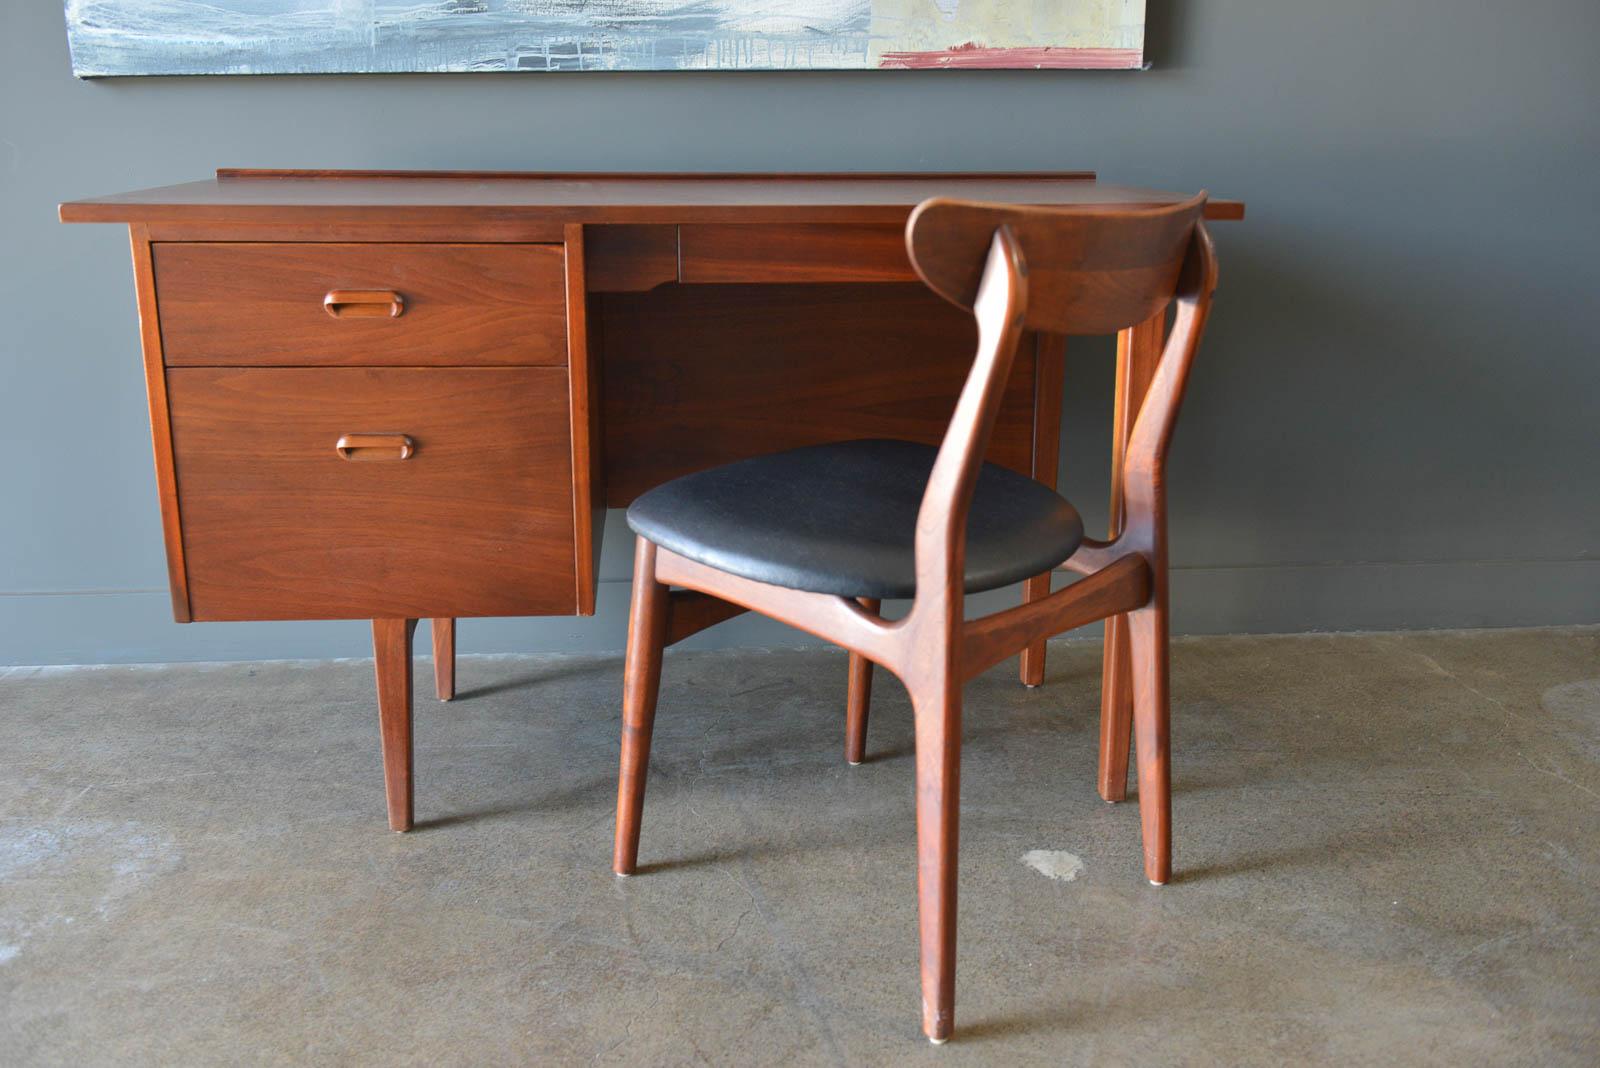 Walnut desk by Jack Cartwright for Founders, circa 1960. Beautiful walnut grain, professionally restored in perfect condition with hidden upper small drawer and two left drawers. Finished on the reverse, the desk can float in a room. Raised back